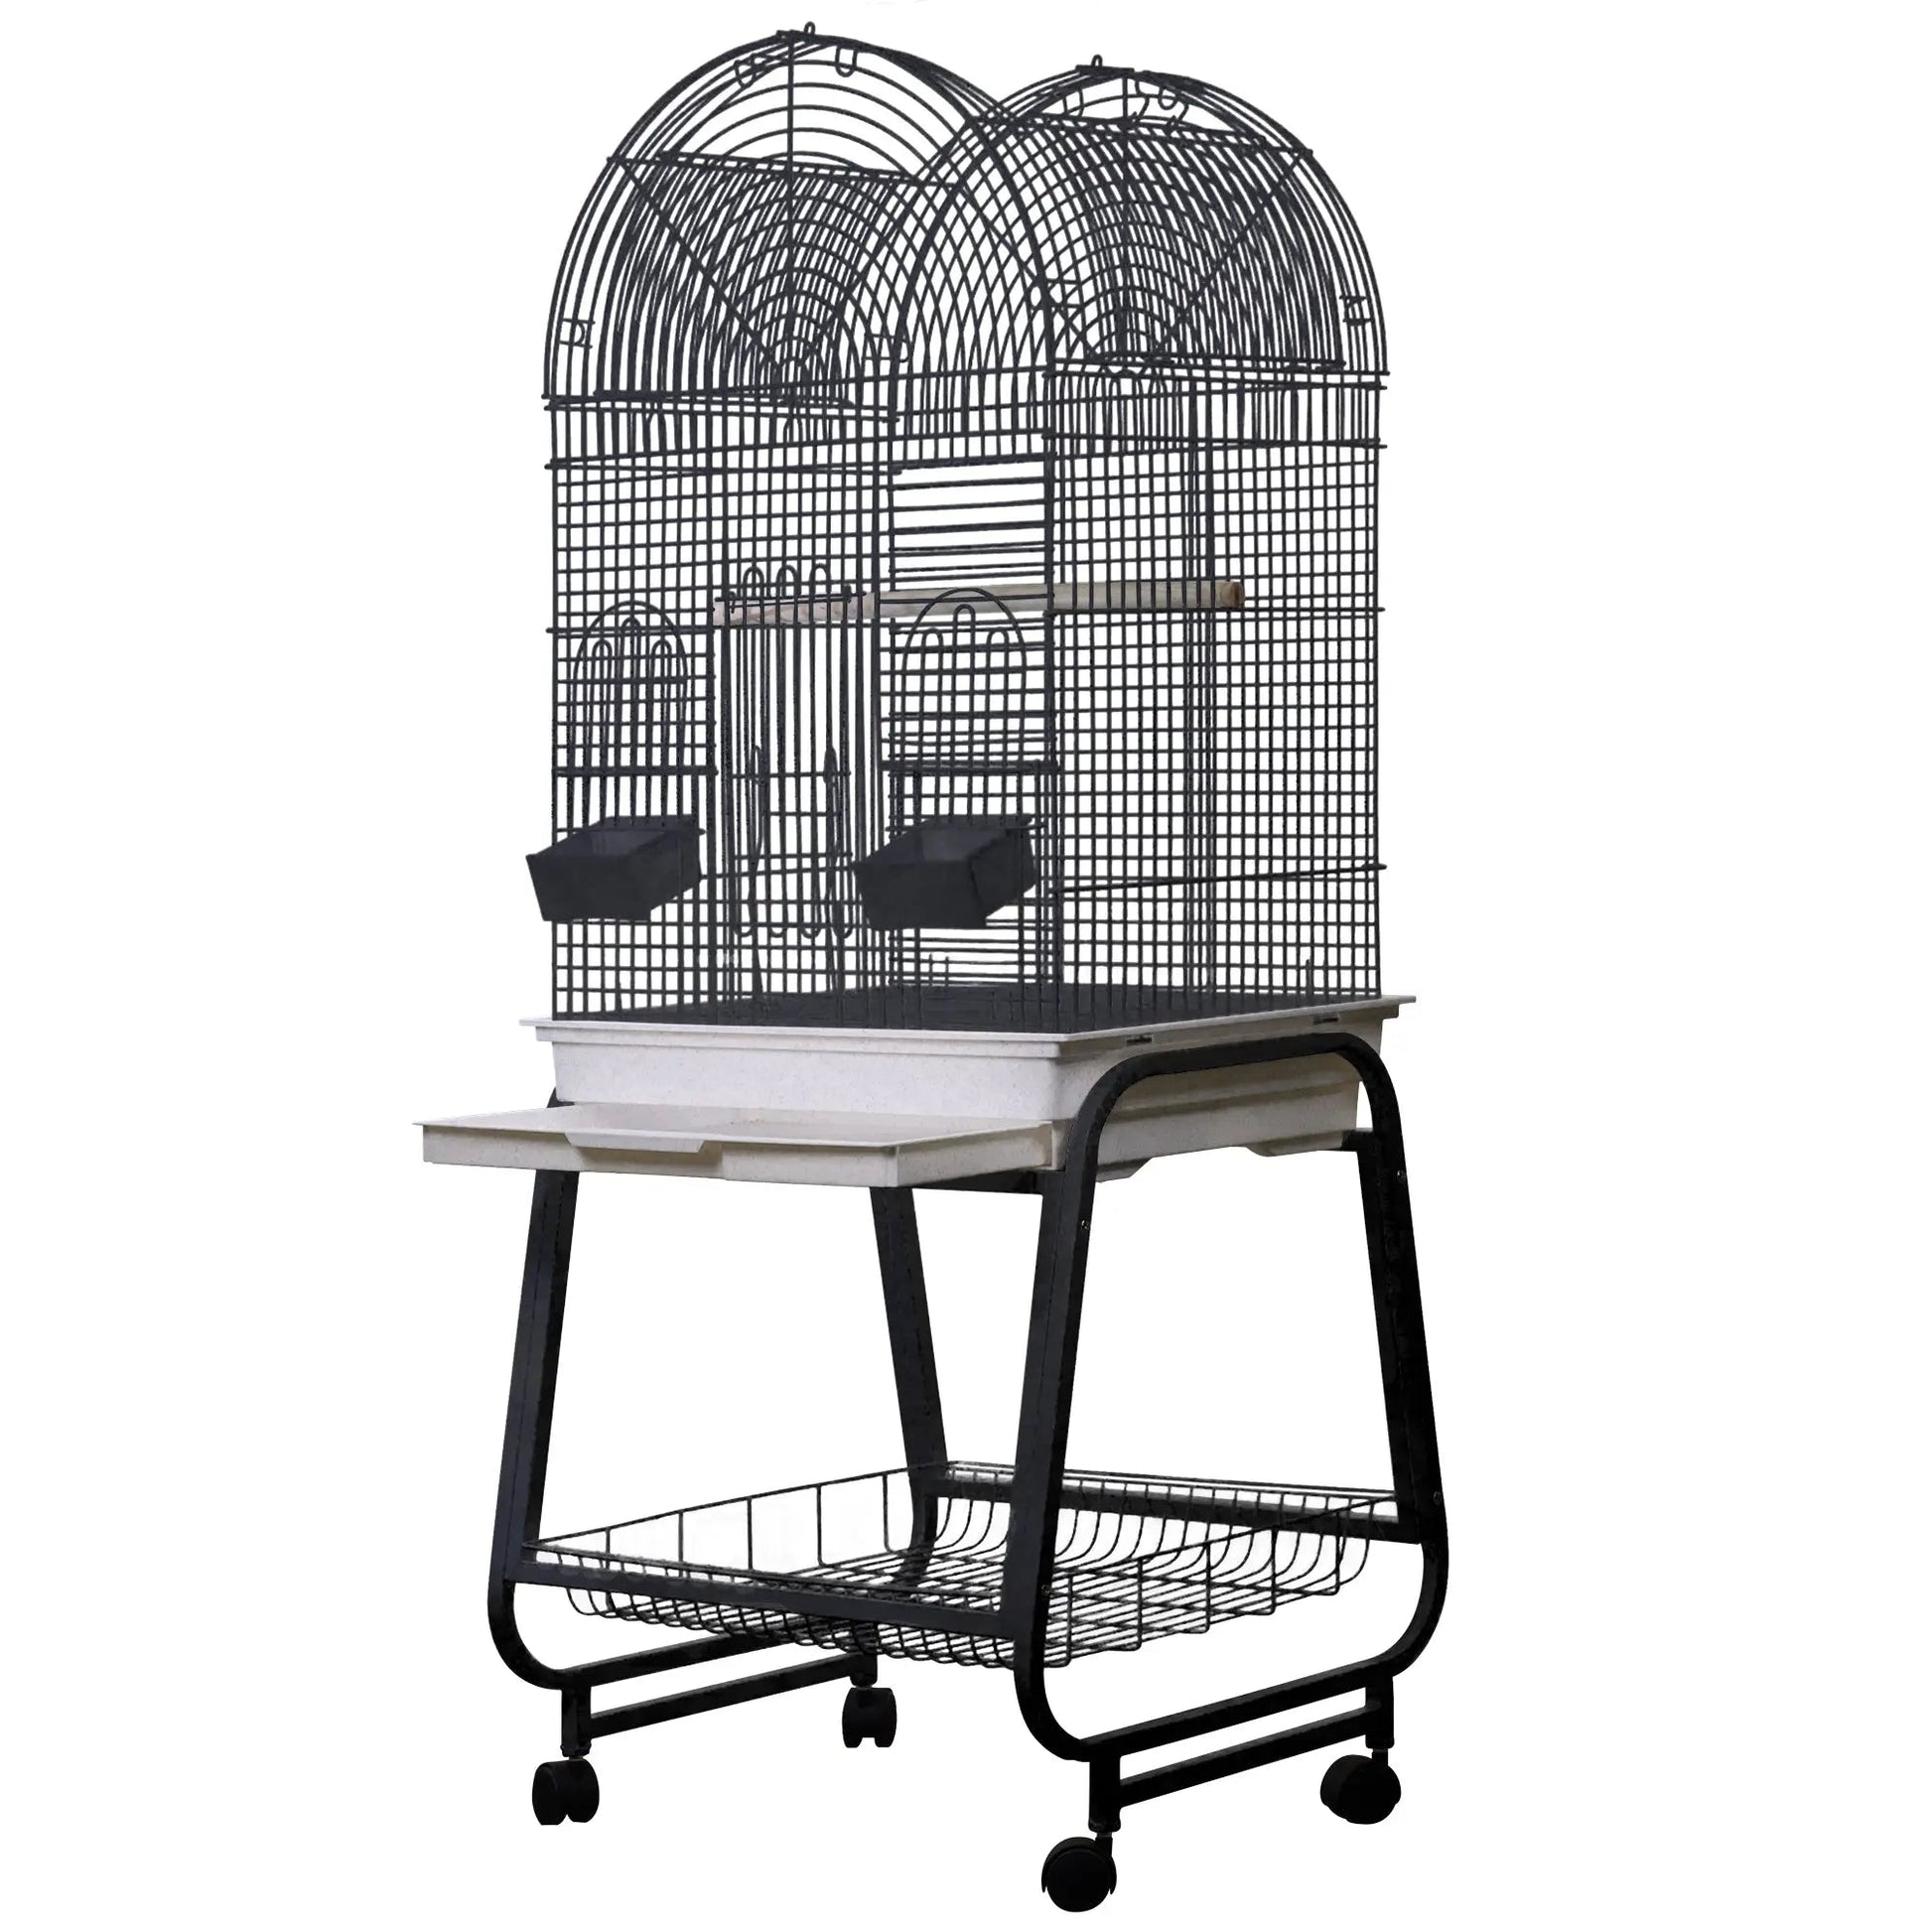 22"x17"x58" Opening Dome Top, Plastic Base, and Removable Metal Stand - PremiumPetsPlus